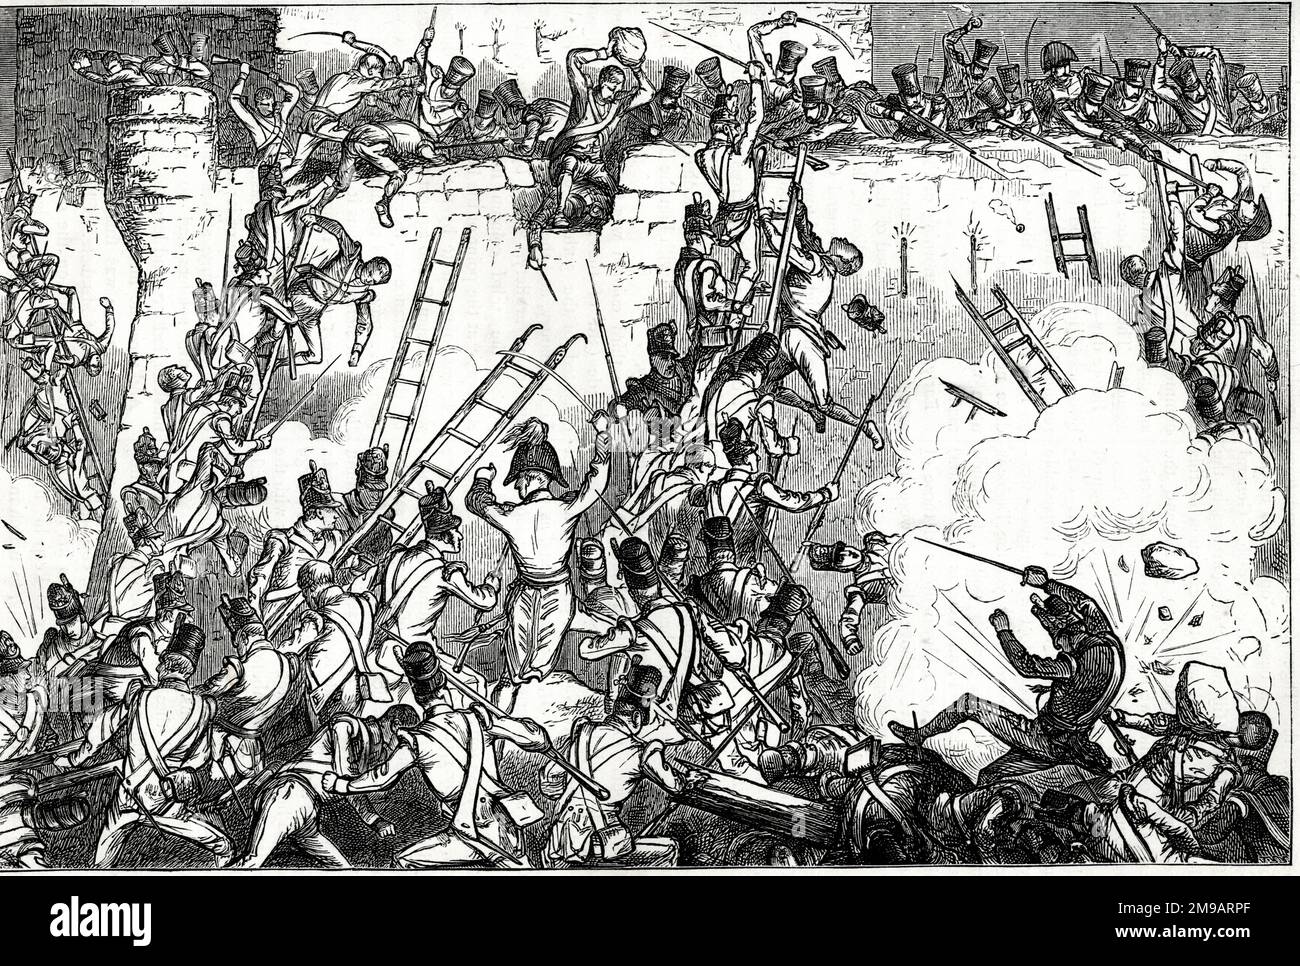 Storming of Badajoz towards the end of the Siege of Badajoz, Extremadura, Spain, 6 April 1812, by Wellington's Anglo-Portuguese forces against the French, part of the Peninsular War (1807-1814). Ladders were used to reach the top of the wall, and many lives were lost with attacks from above. Stock Photo